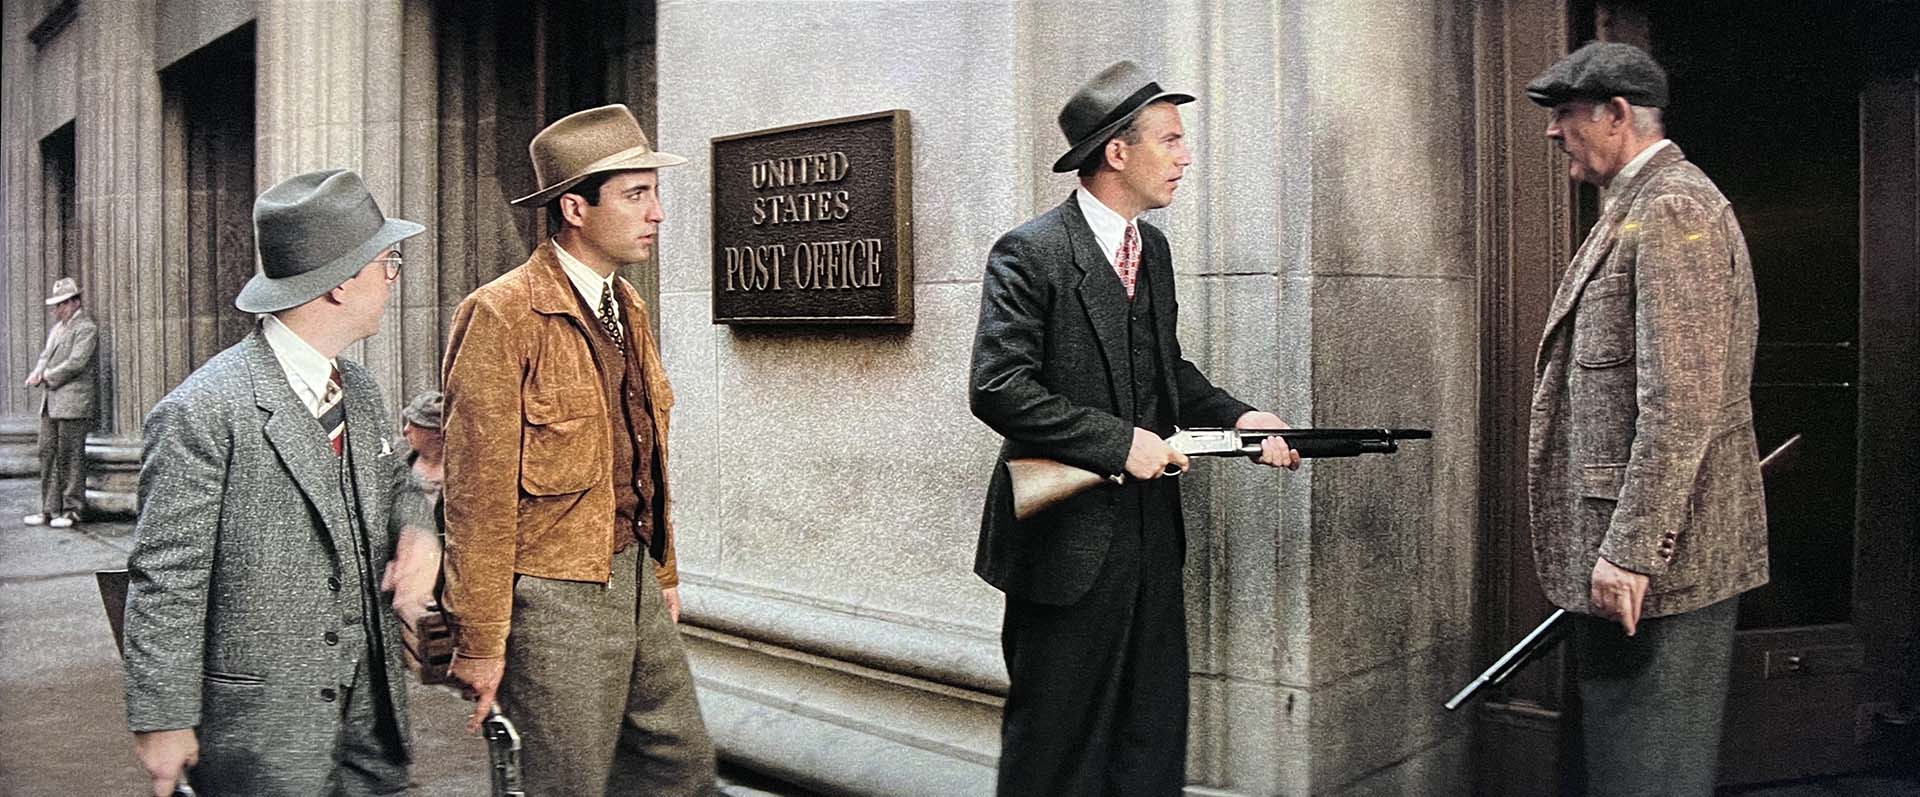 the untouchables at the bank